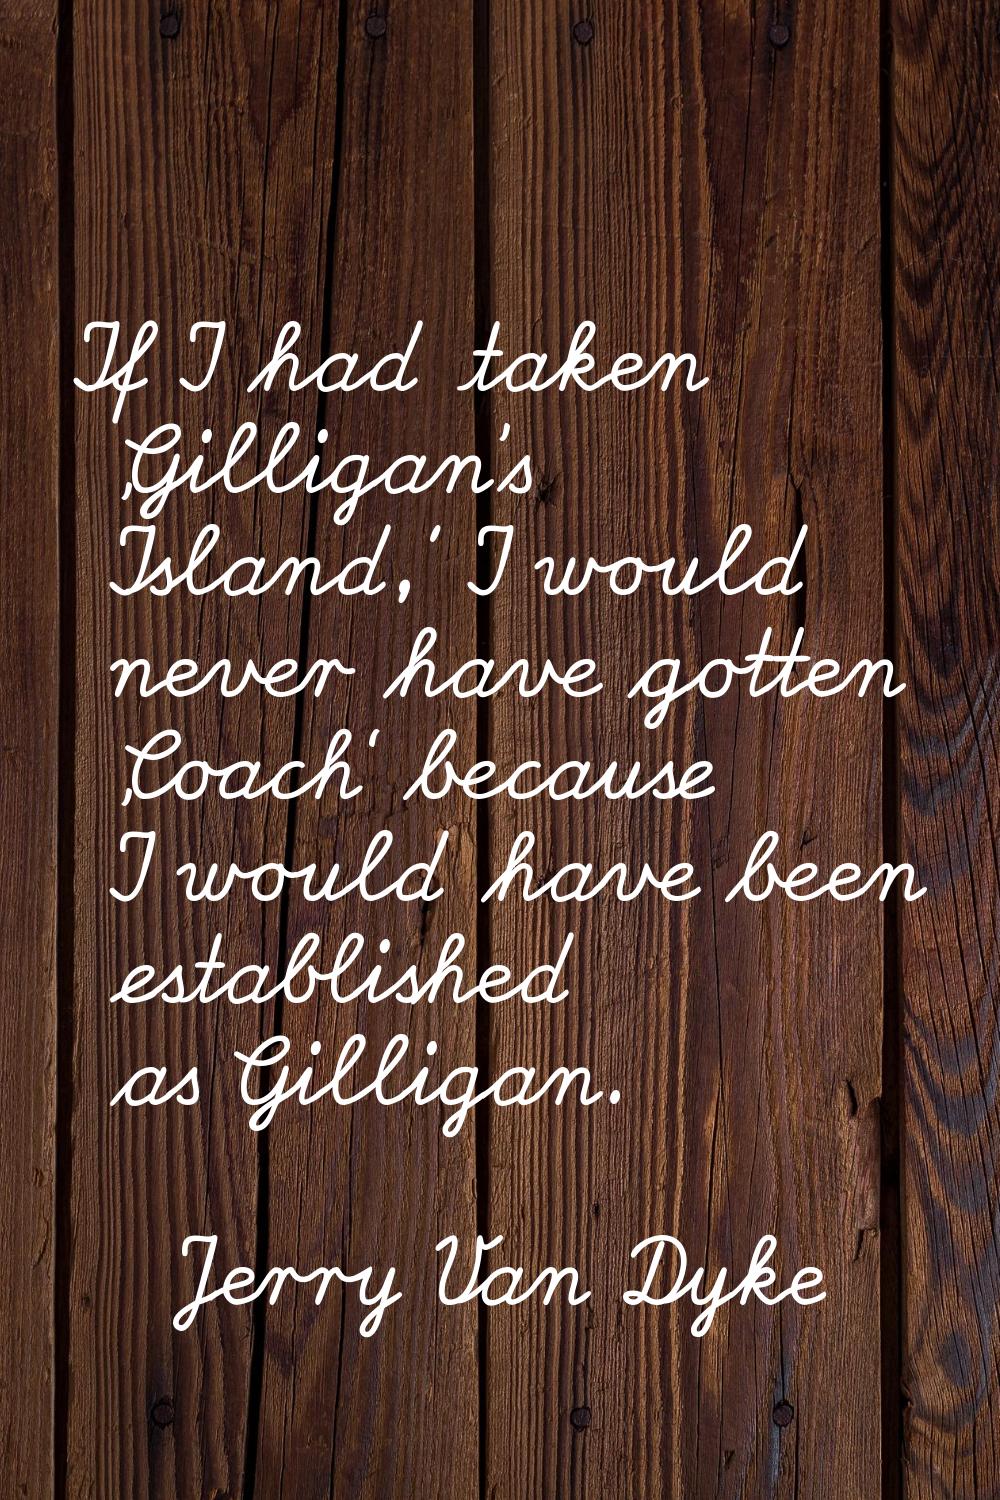 If I had taken 'Gilligan's Island,' I would never have gotten 'Coach' because I would have been est